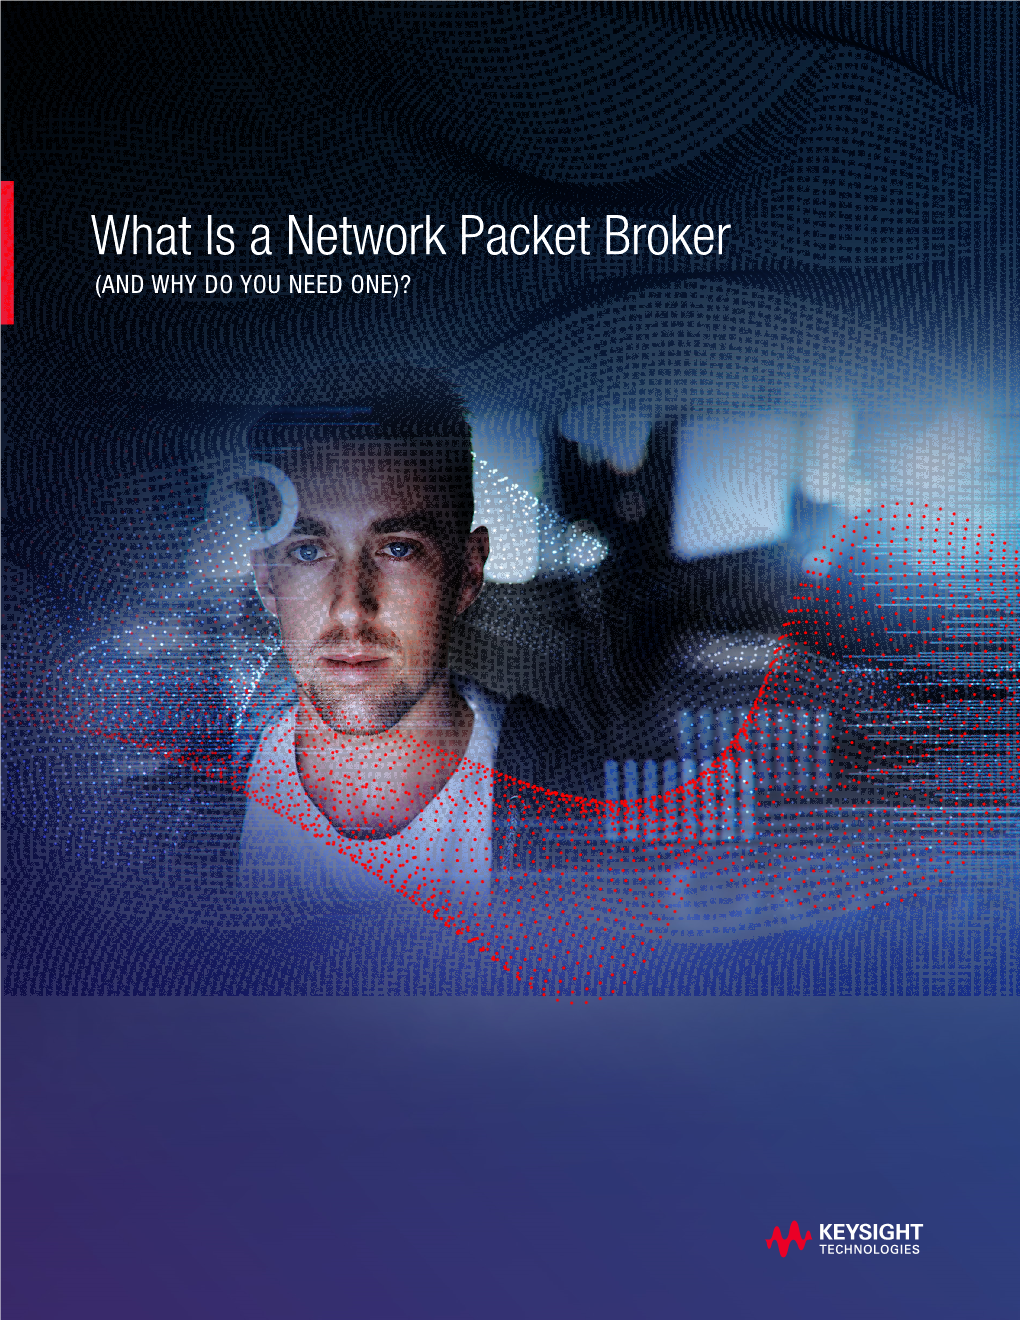 What Is a Network Packet Broker (AND WHY DO YOU NEED ONE)? Introduction